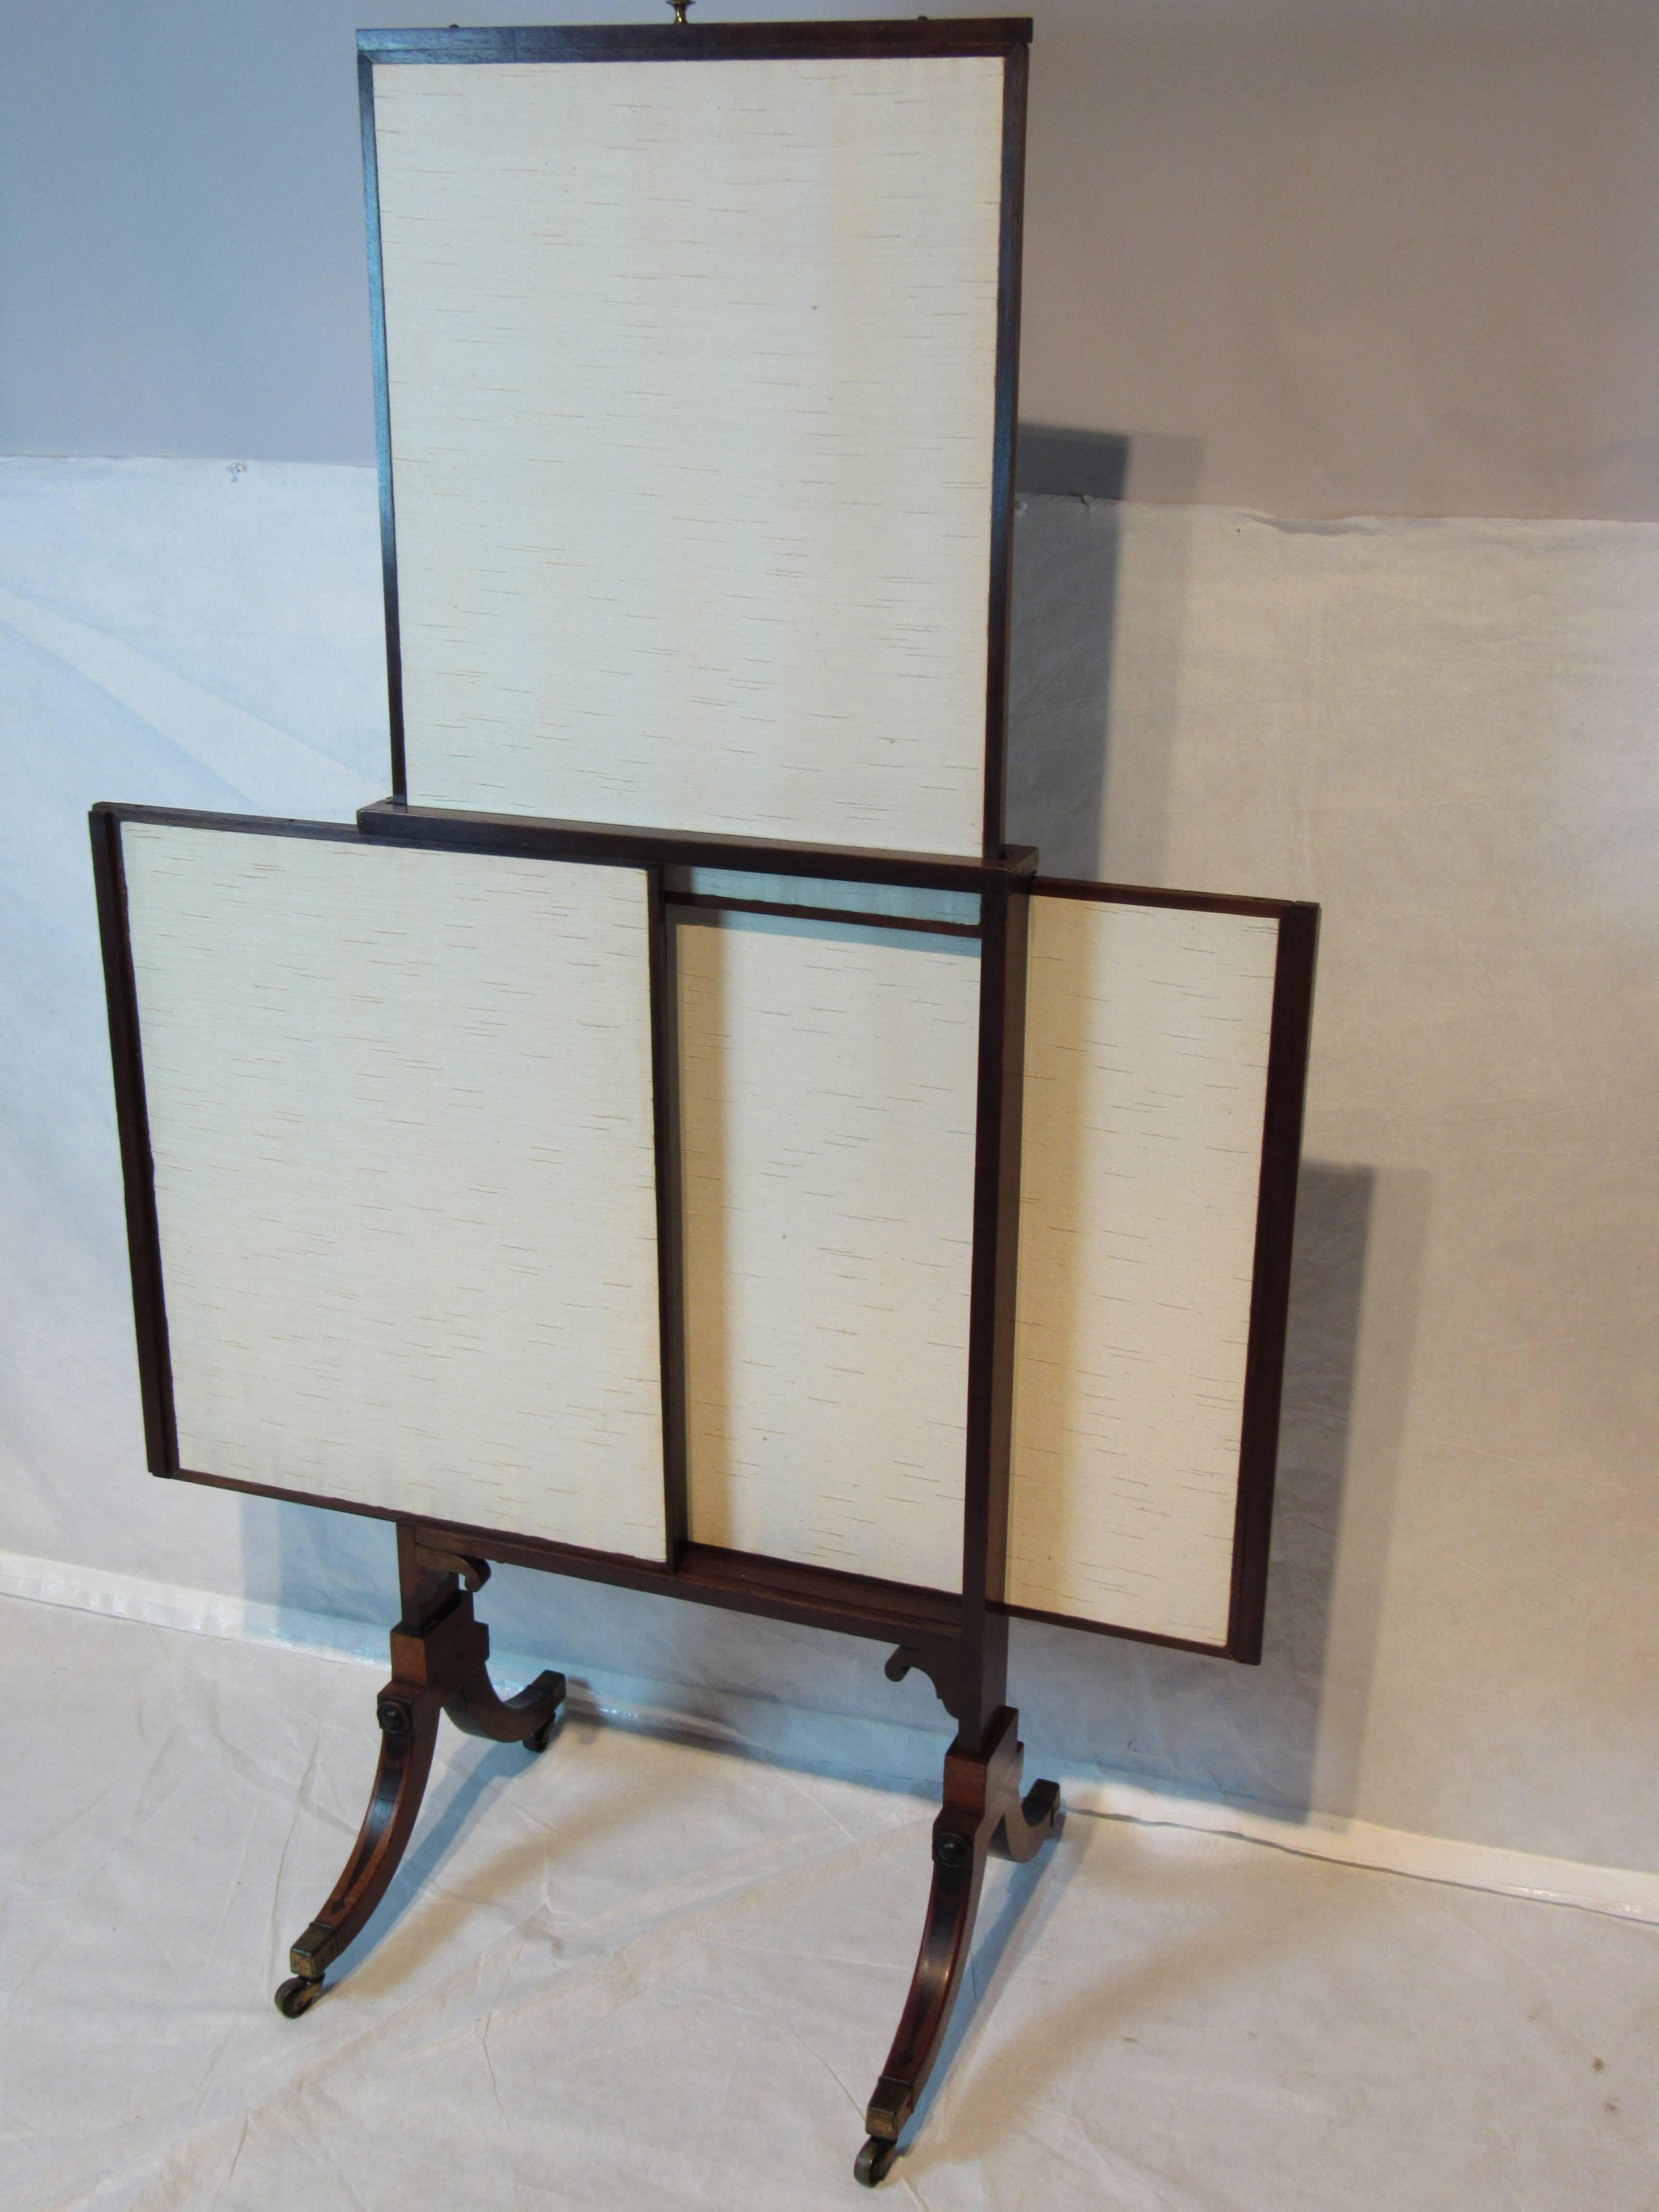 Unusual American mahogany extendable fireplace screen in the style of Thomas Sheraton. 
The classically styled mahogany frame with ebonized inlays hold three raw linen upholstered panels that are adjustable. 
The rolling frame rests on brass sabots